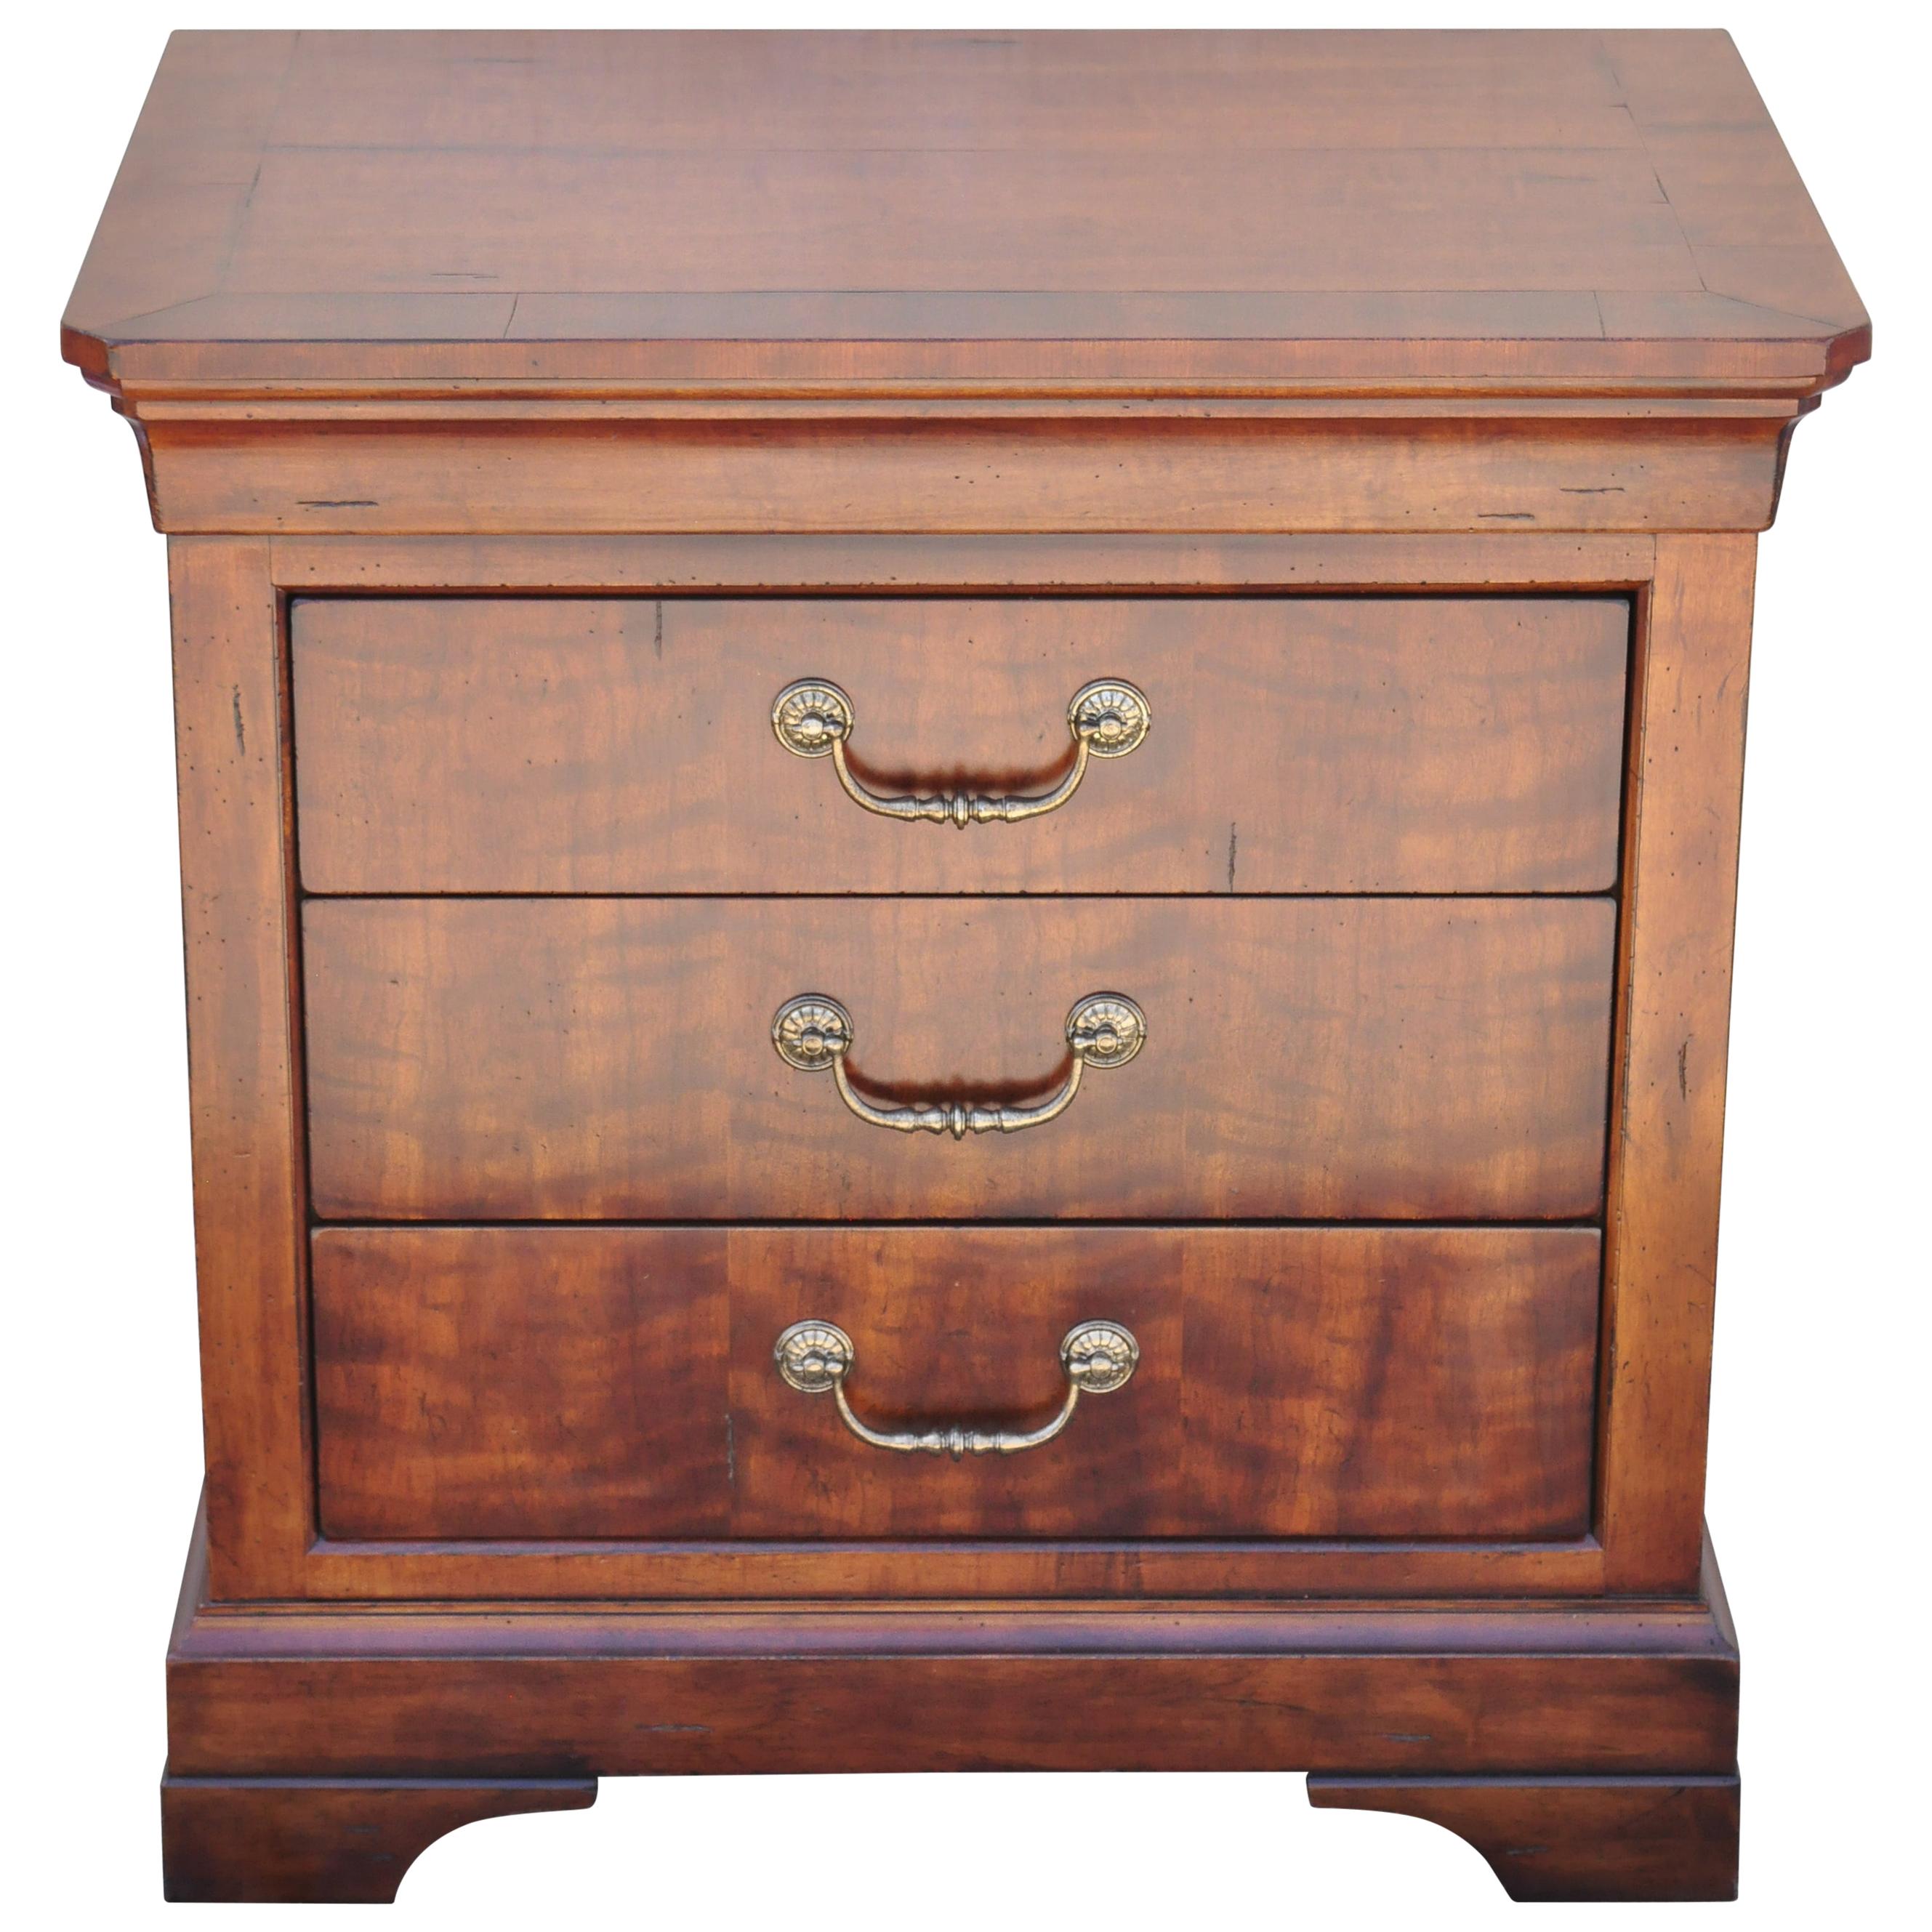 Henredon Cavalier Aged Cherry Wood 3 Drawer Nightstand Bedside Table